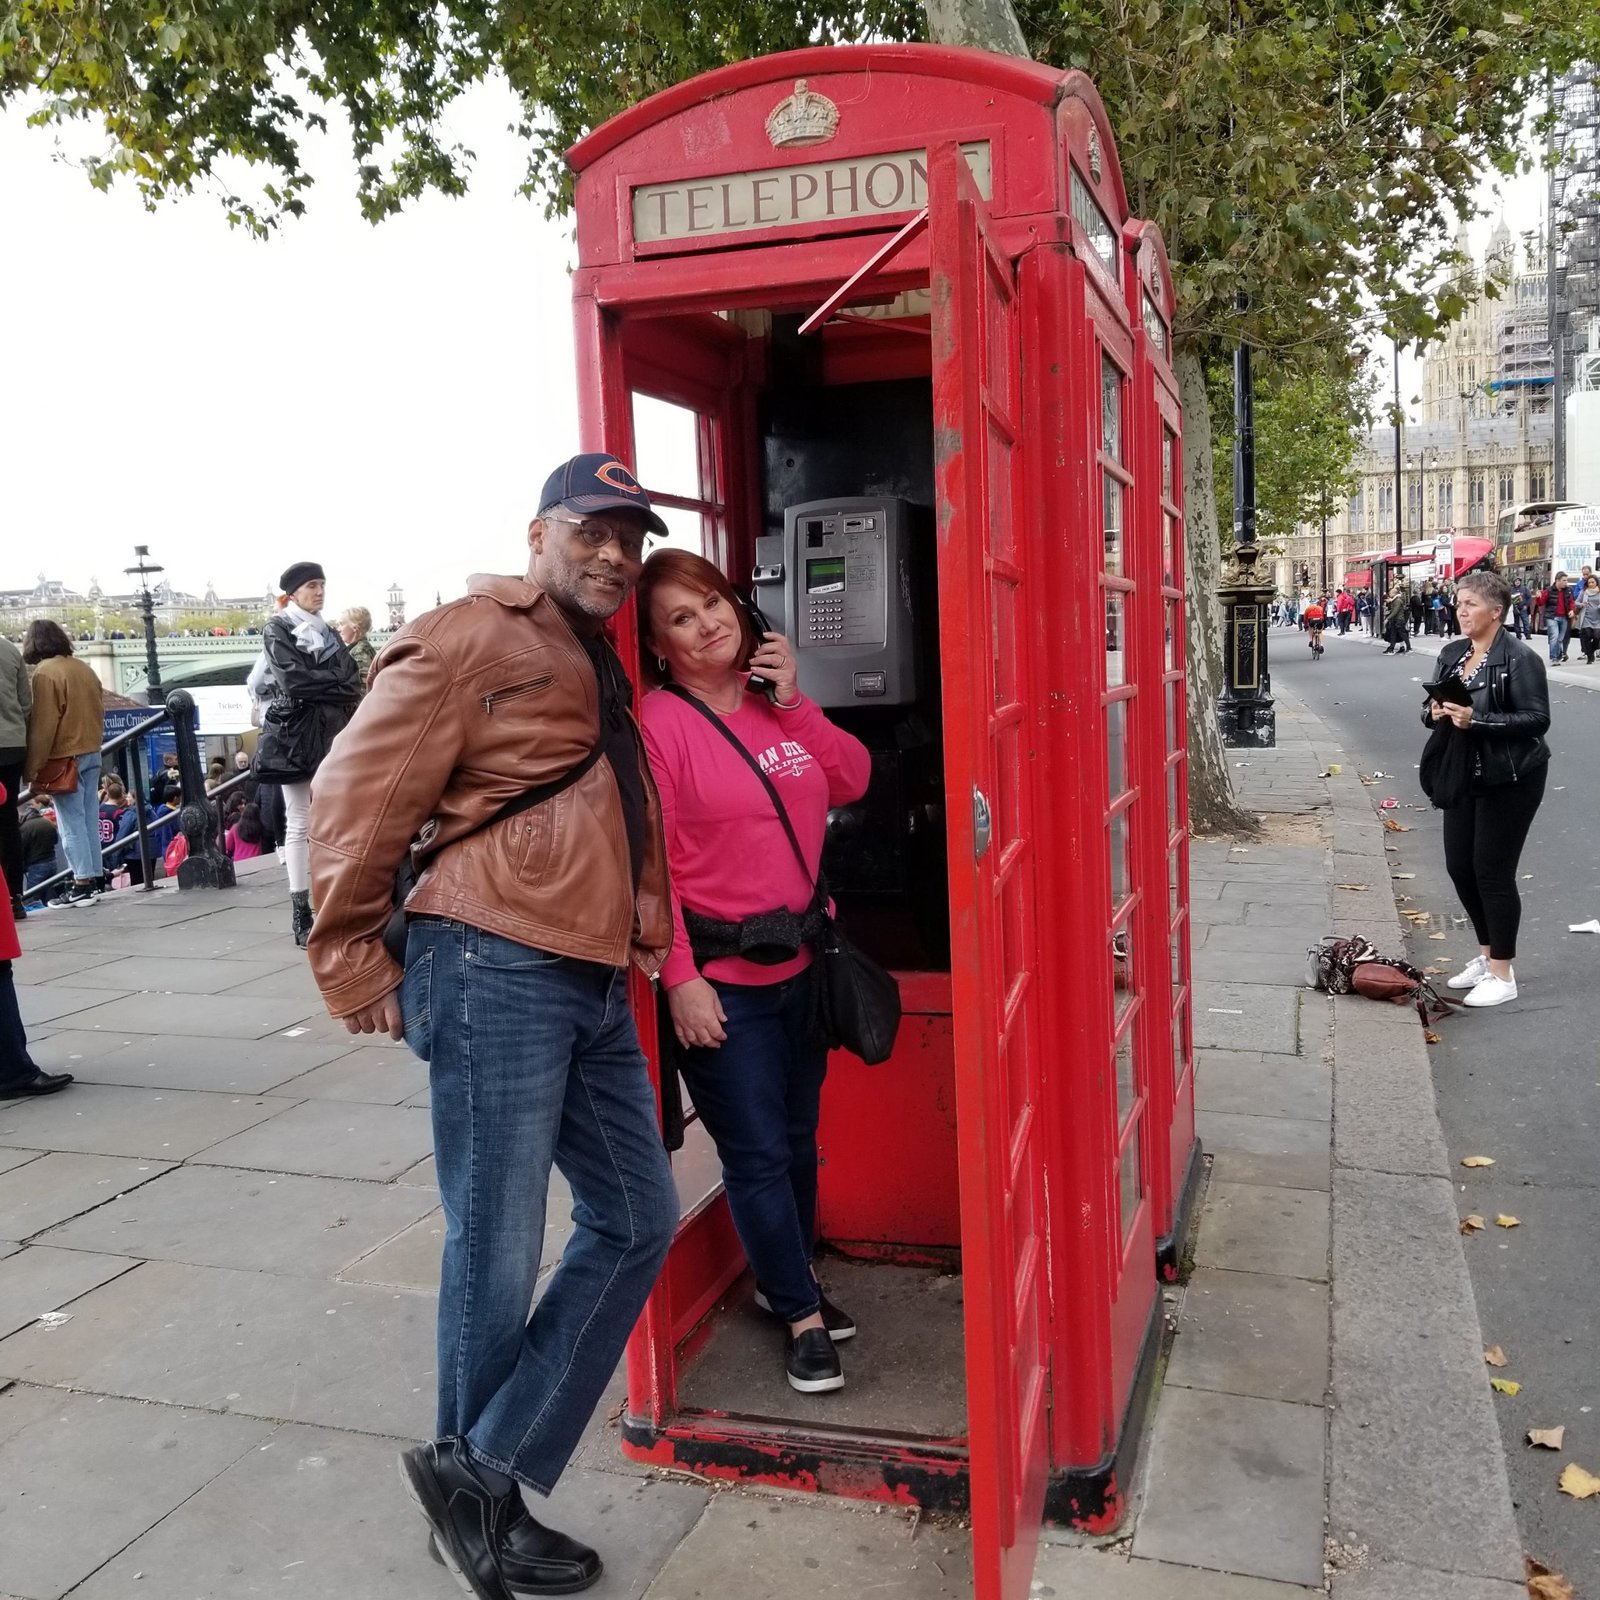 The red telephone box